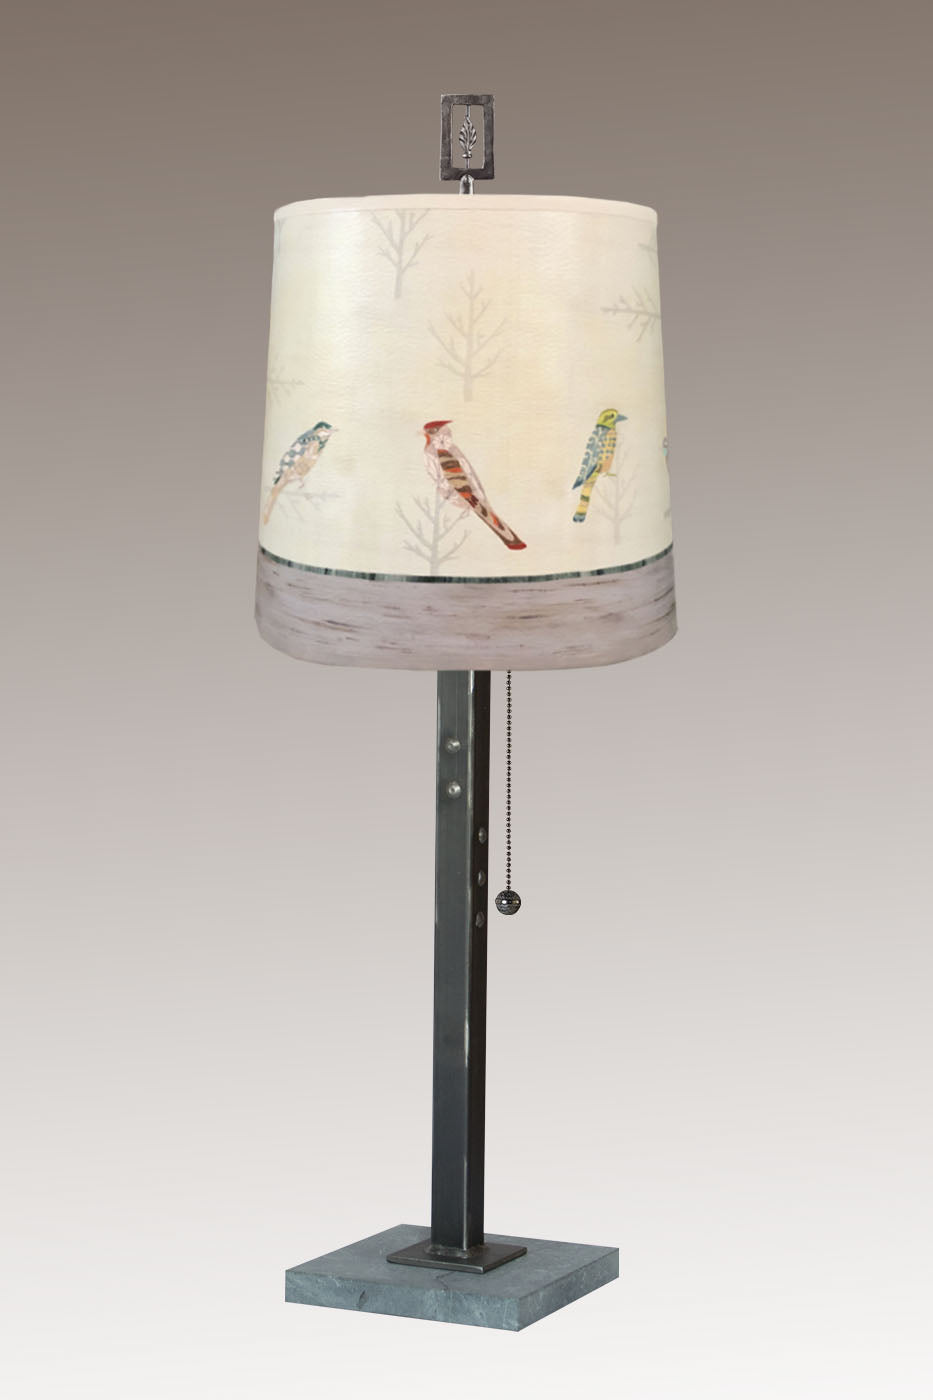 Janna Ugone & Co Table Lamps Steel Table Lamp with Medium Drum Shade in Bird Friends